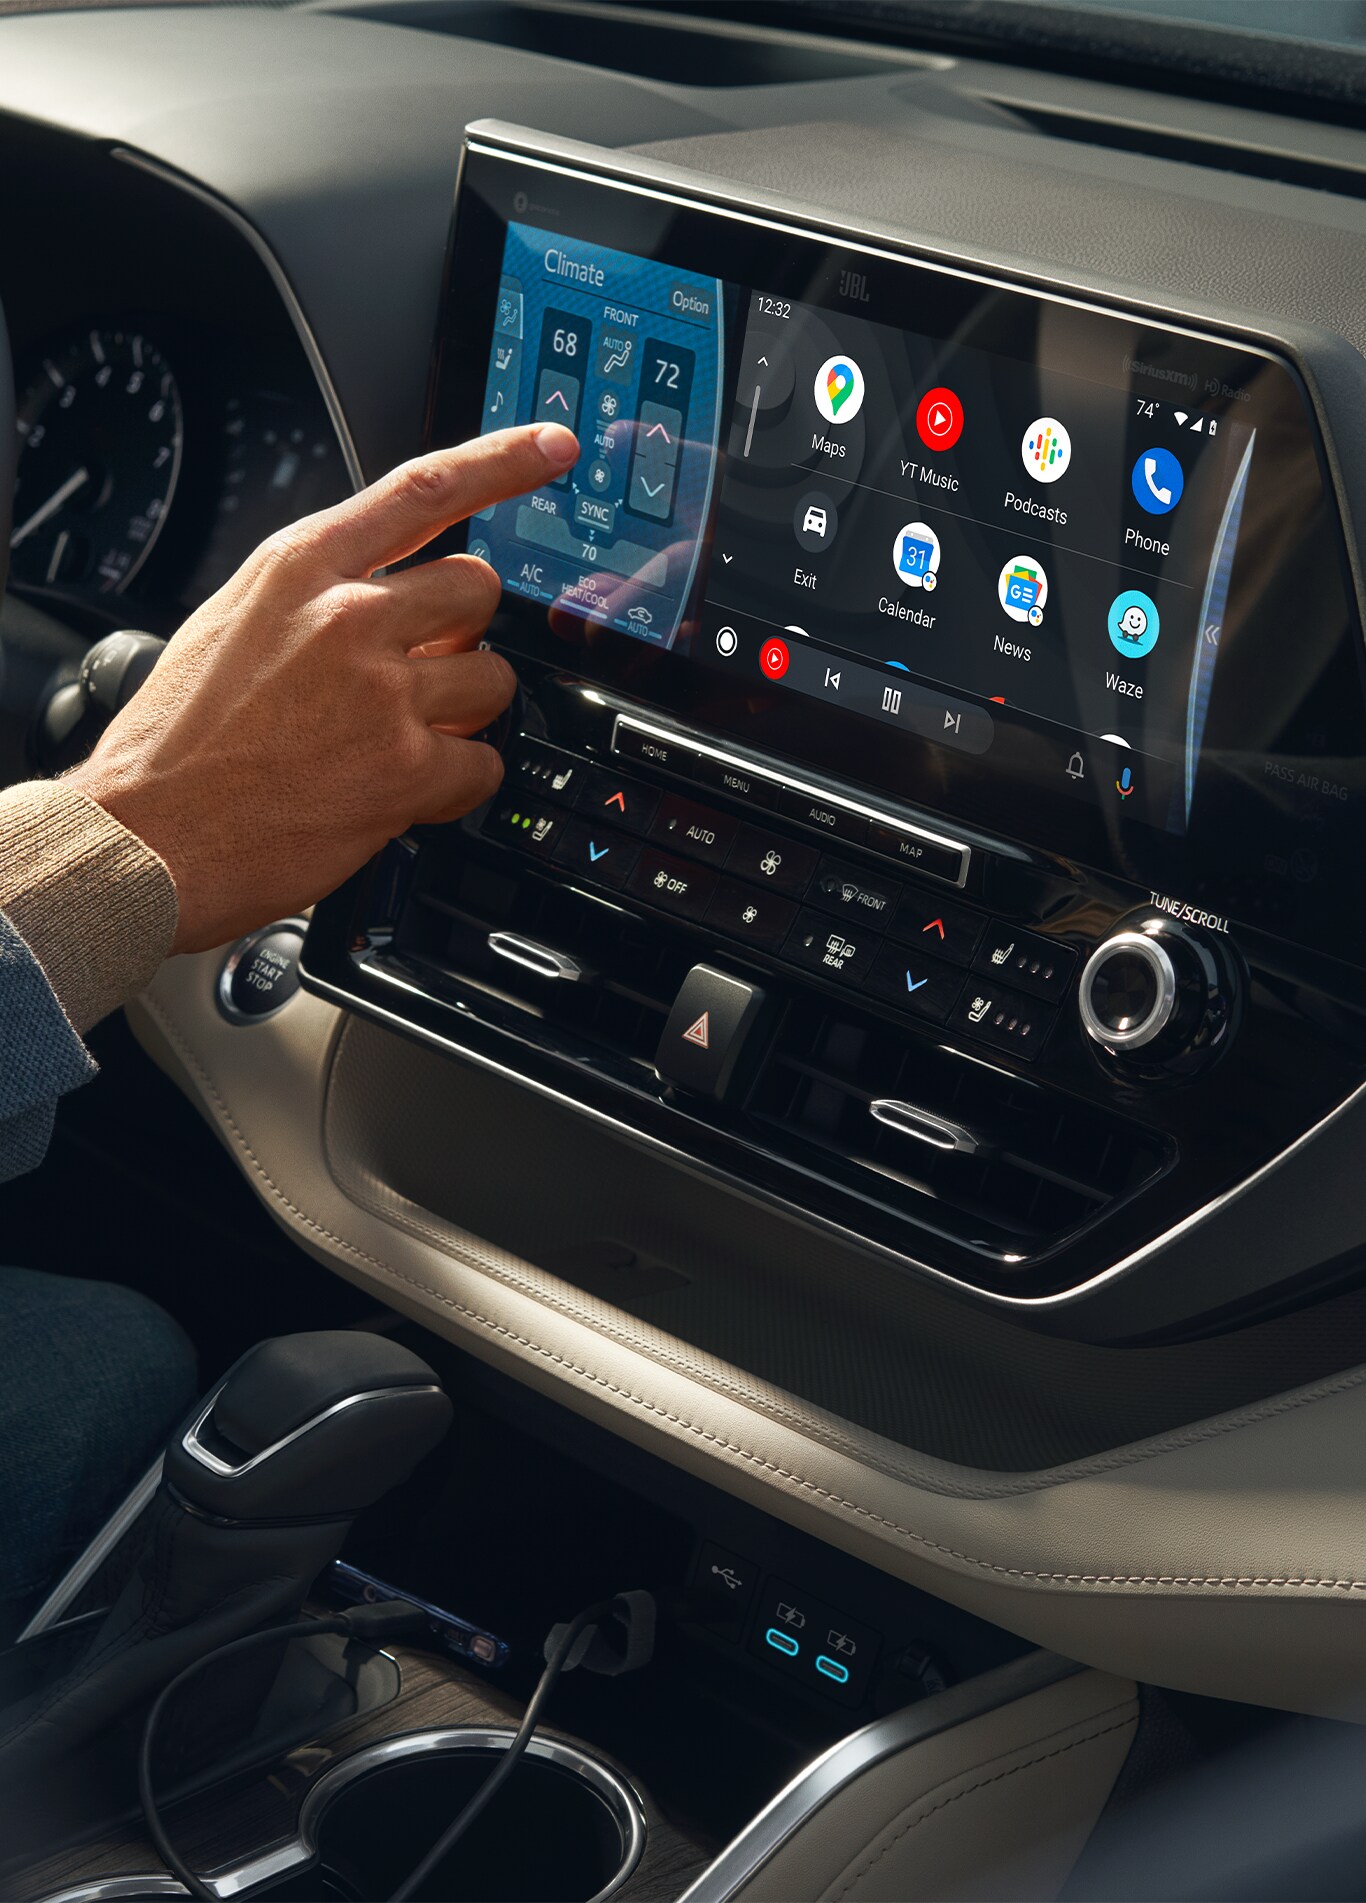 Android Auto vs. Apple CarPlay at Bobby Rahal Toyota in Mechanicsburg, PA | Person's hand using the Android Auto on touch screen